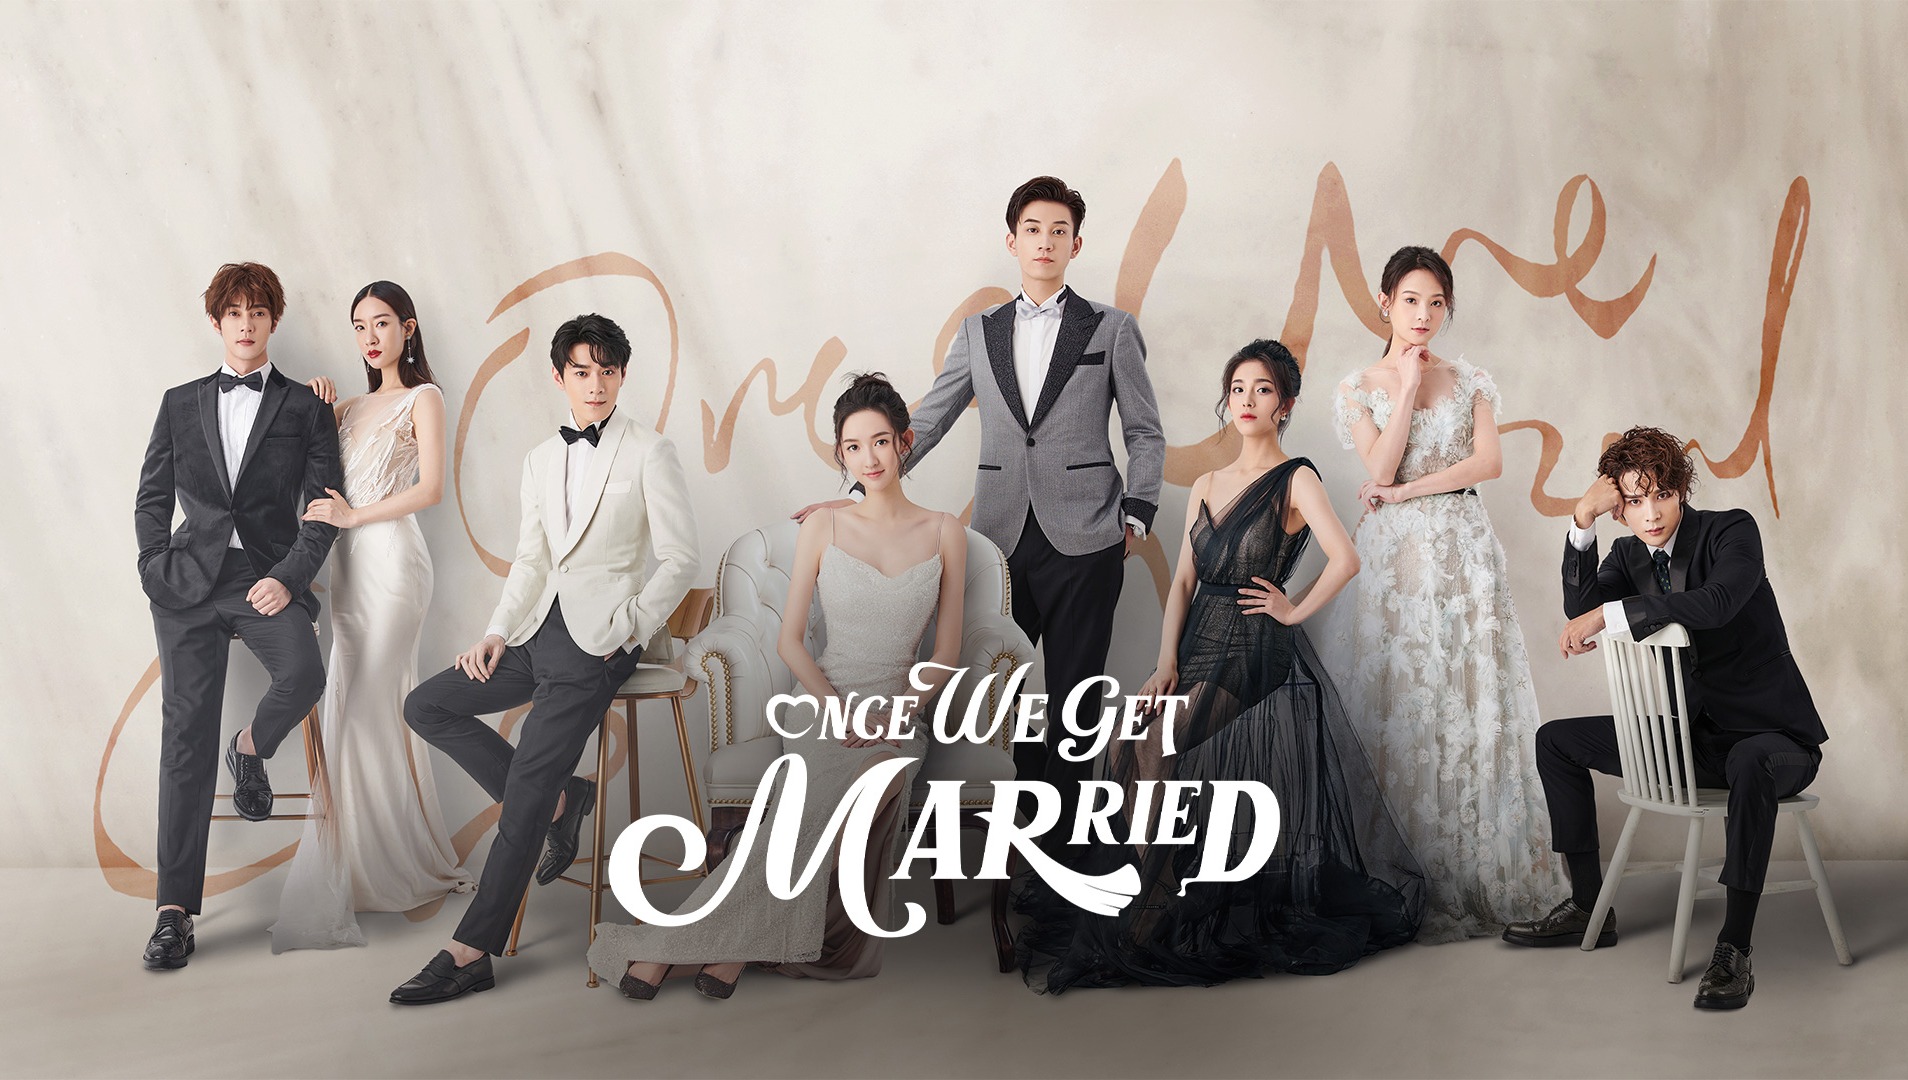 Once we get married ep 15